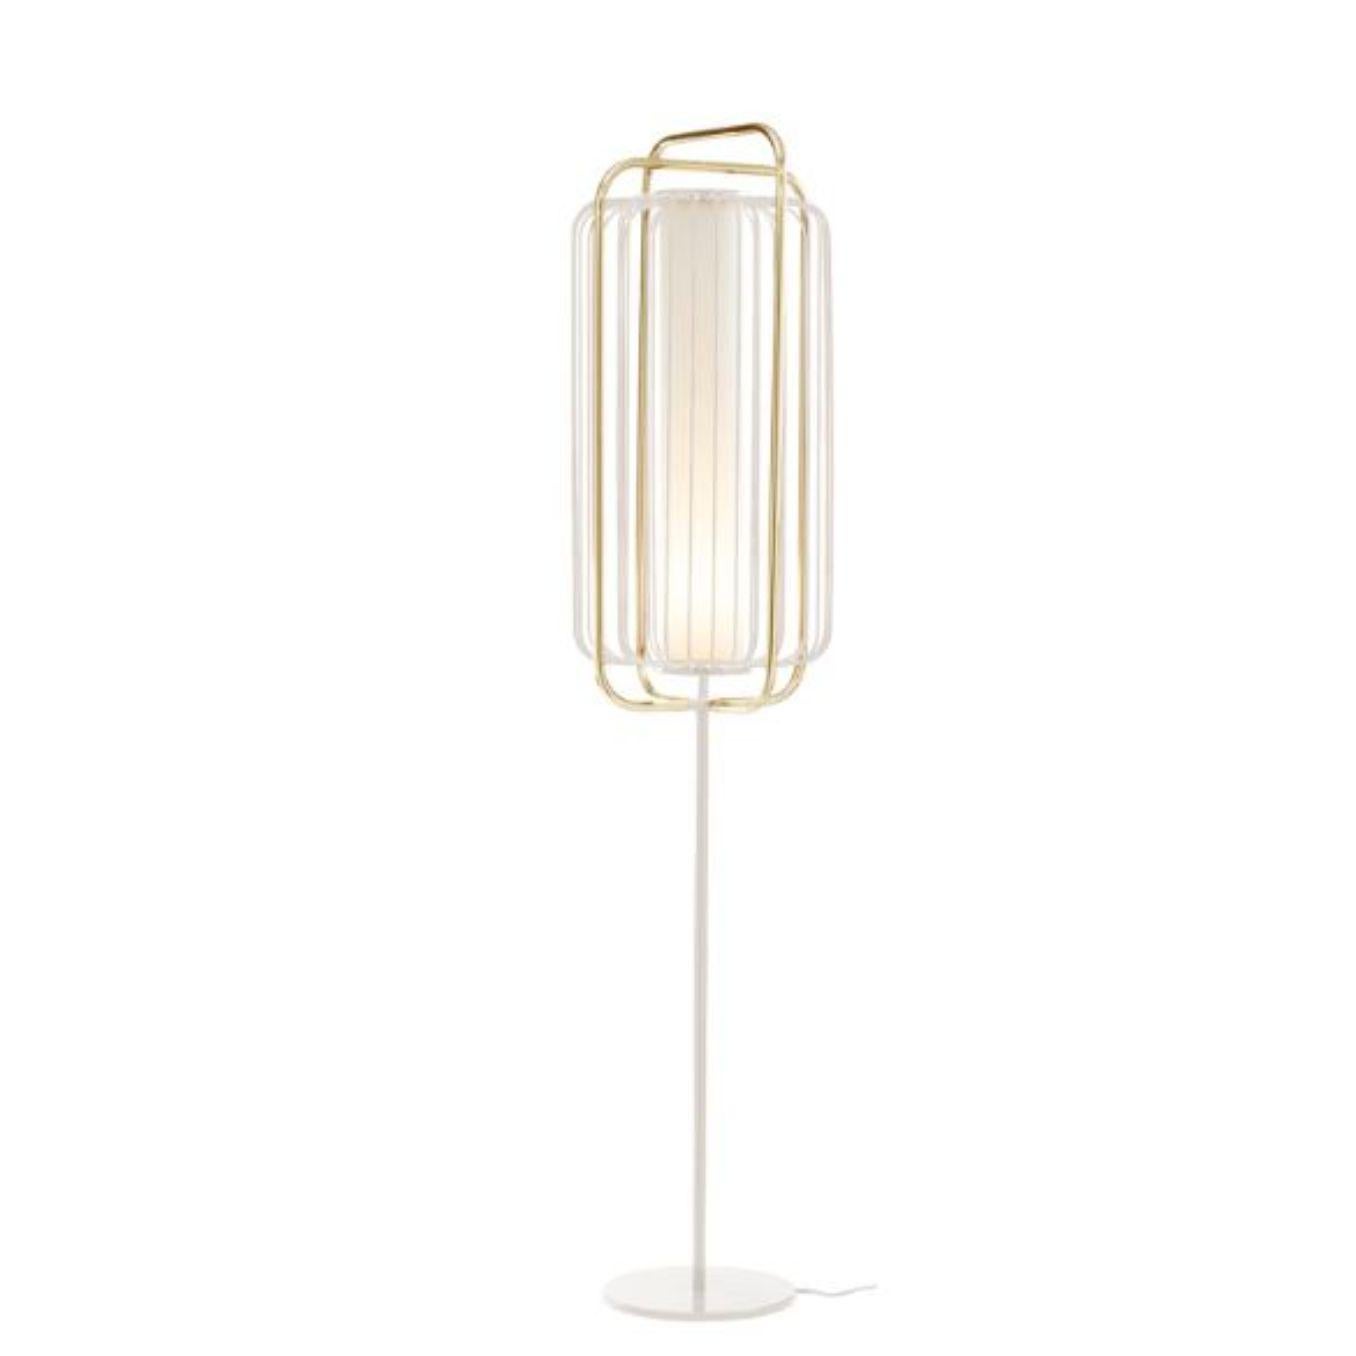 Brass and ivory Jules floor lamp by Dooq.
Dimensions: W 38 x D 38 x H 177 cm
Materials: lacquered metal, polished or brushed metal, brass.
abat-jour: cotton
Also available in different colours and materials.

Information:
230V/50Hz
E27/1x20W